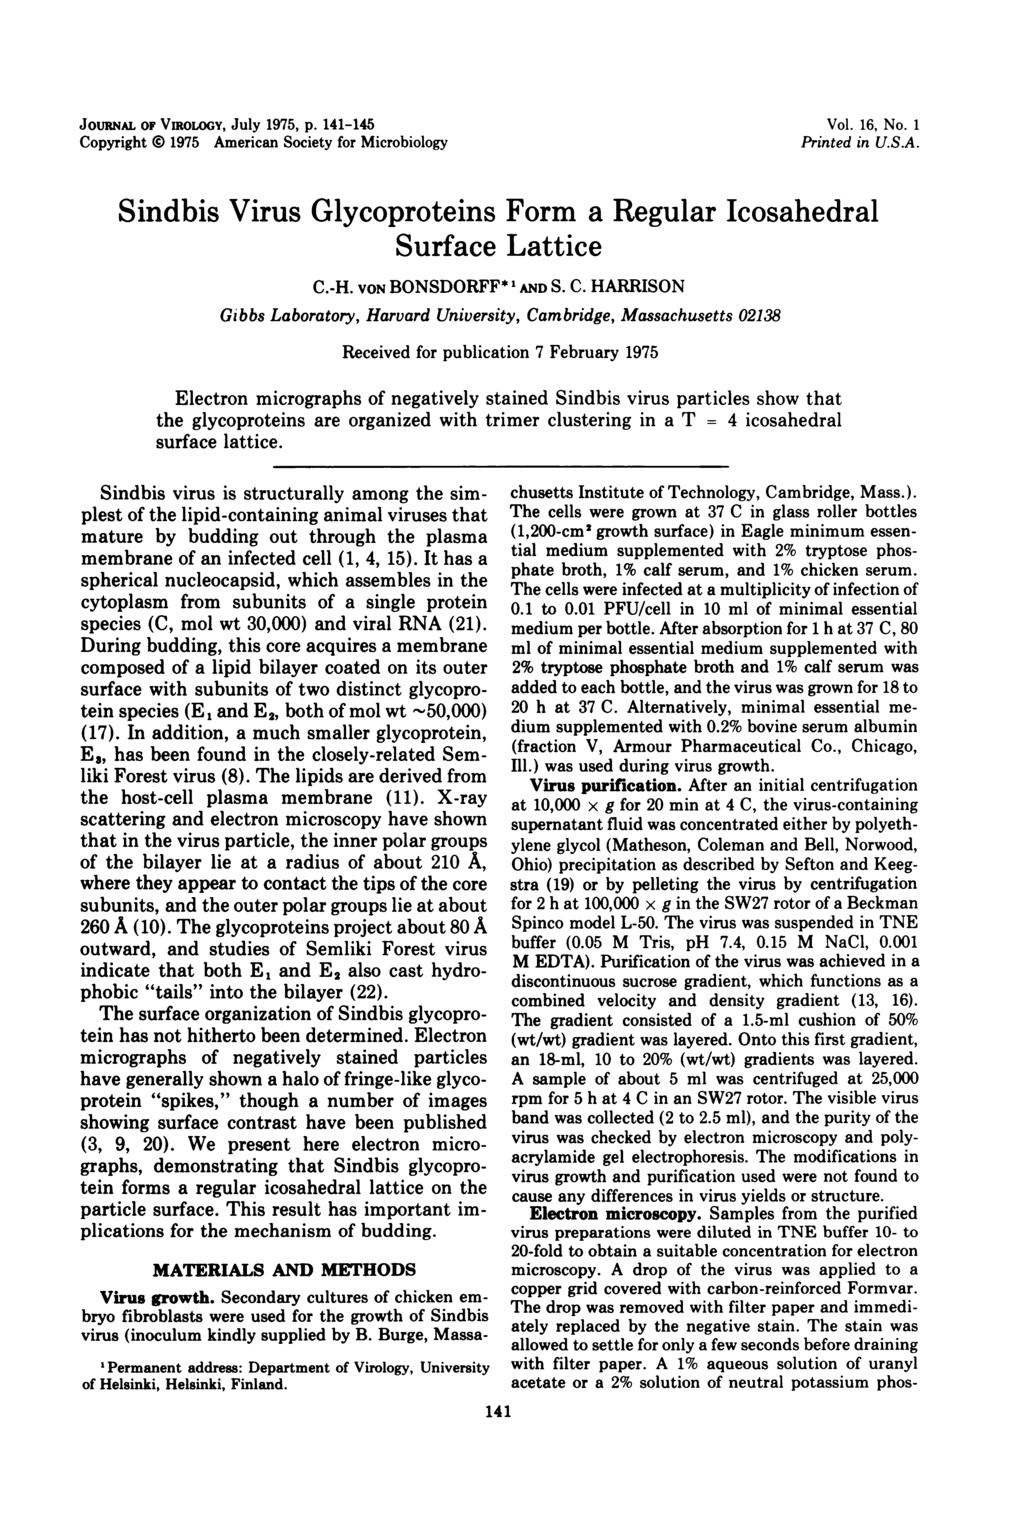 JOURNAL OF VIROLOGY, July 1975, p. 141-145 Copyright i 1975 American Society for Microbiology Vol. 16, No. 1 Printed in U.S.A. Sindbis Virus Glycoproteins Form a Regular Icosahedral Surface Lattice C.